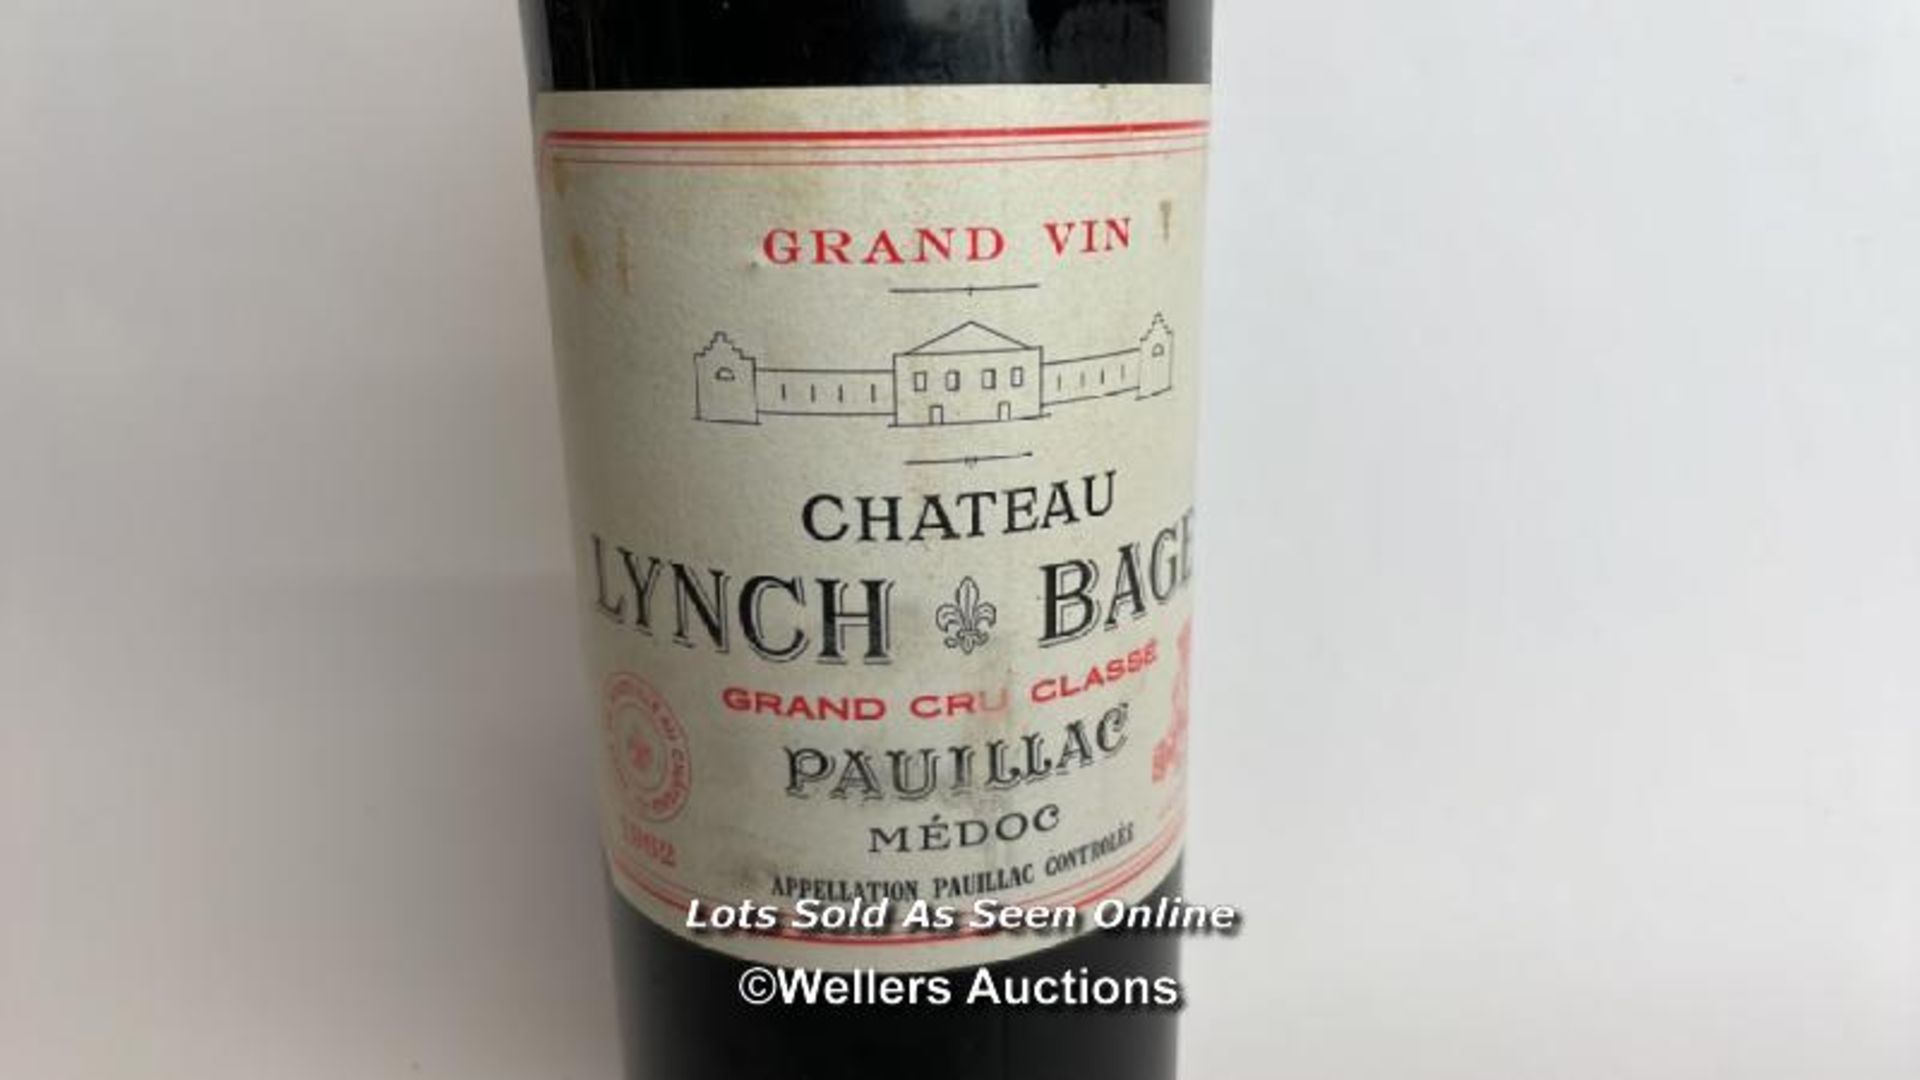 1962 Grand Vint Chateau Lynch Bages Grand Cru Classe Pauillac Medoc, 75cl / Please see images for - Image 2 of 6